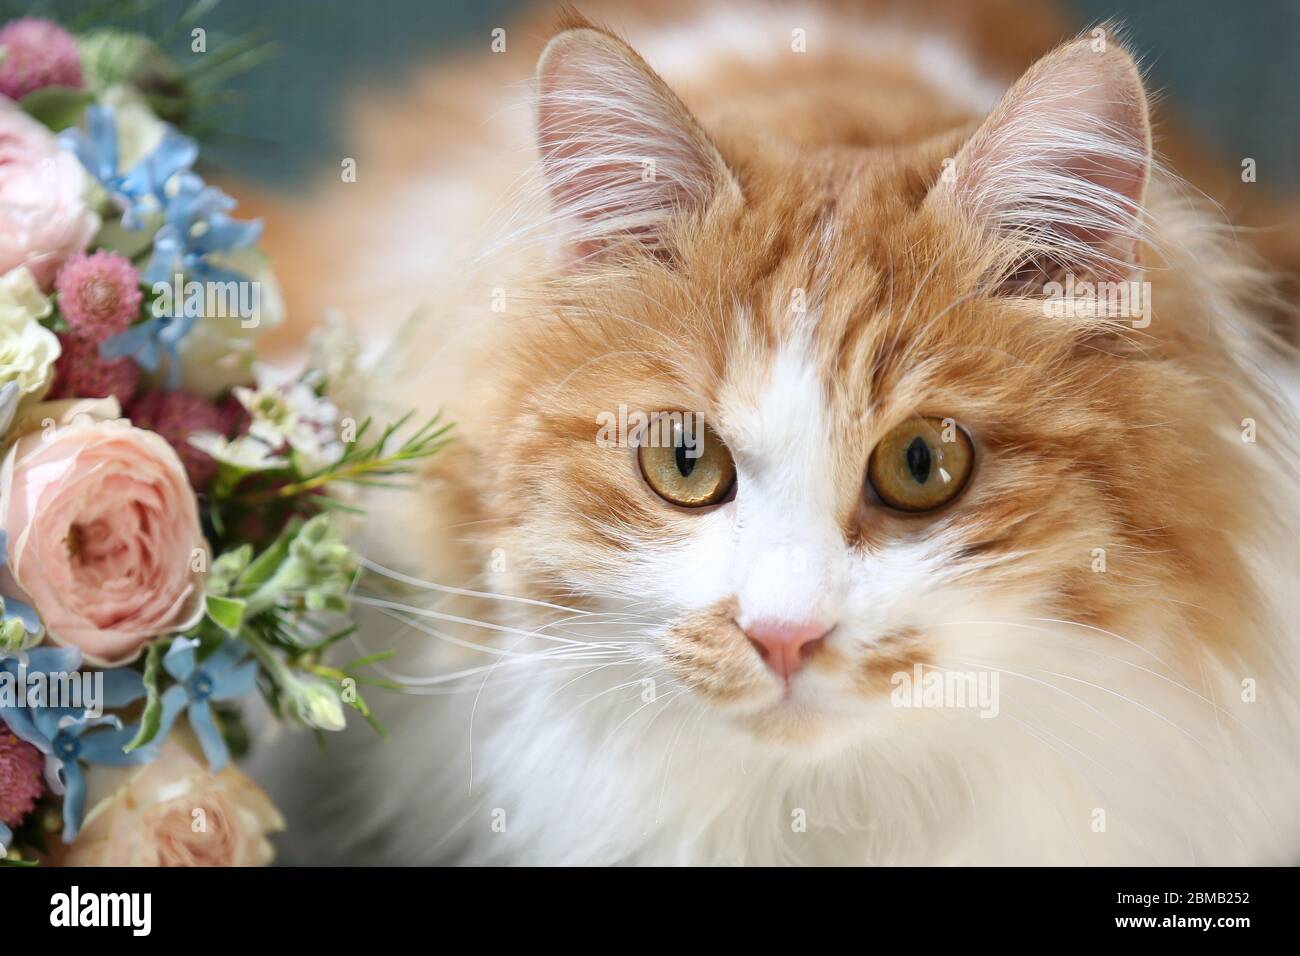 kitten with wedding rings. White and ginger cat sitting on a green ...